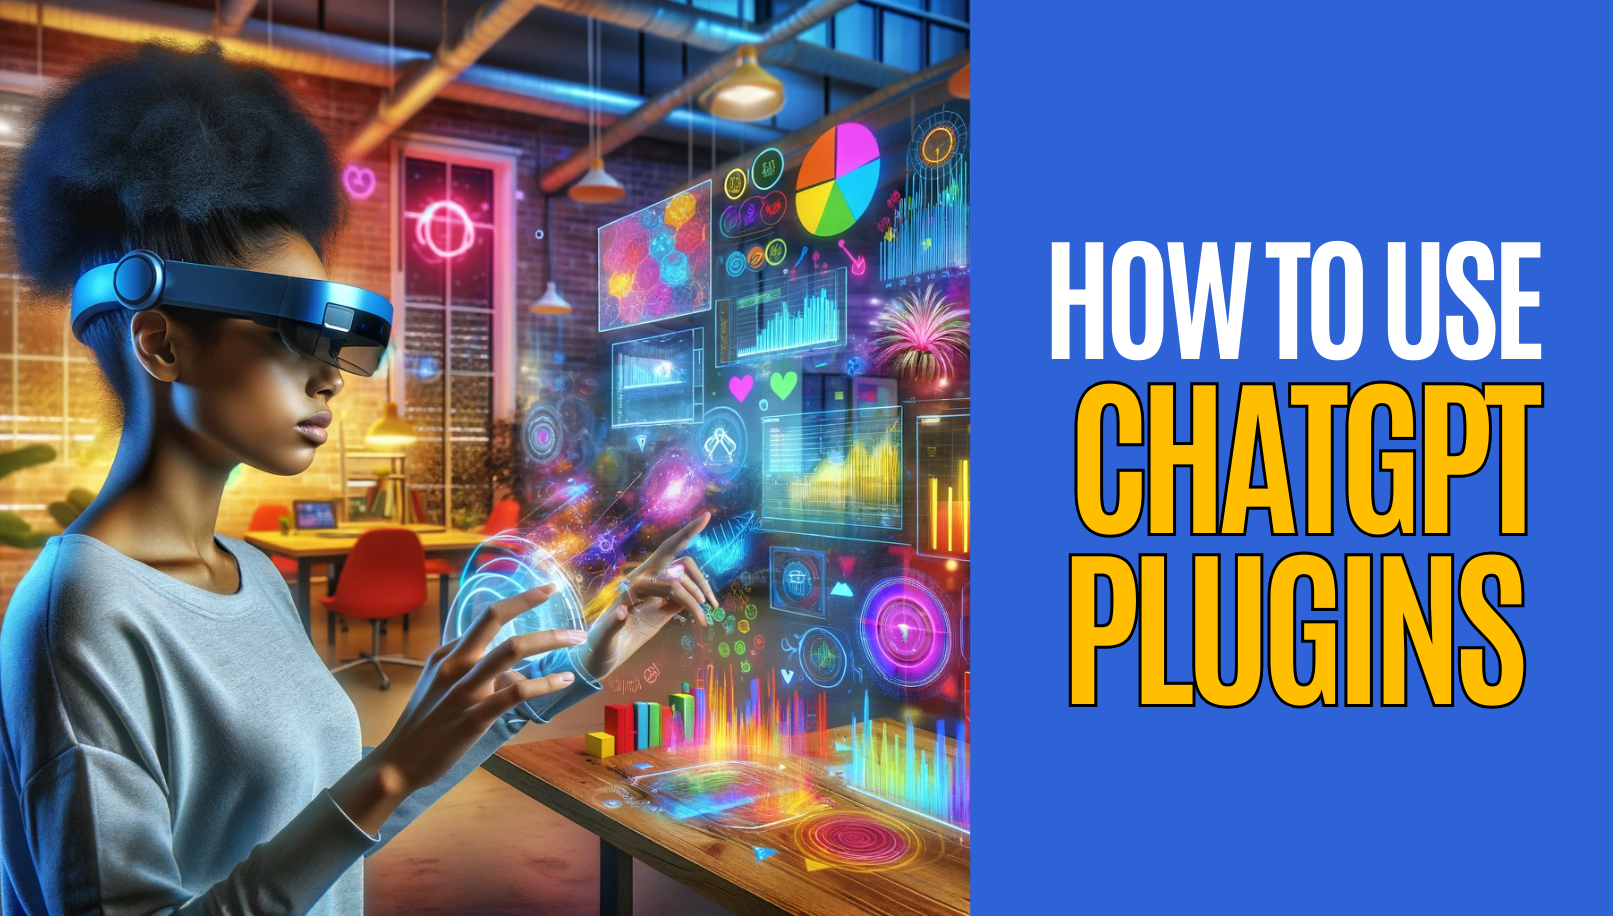 Beyond The Basic Conversation: How To Use ChatGPT Plugins